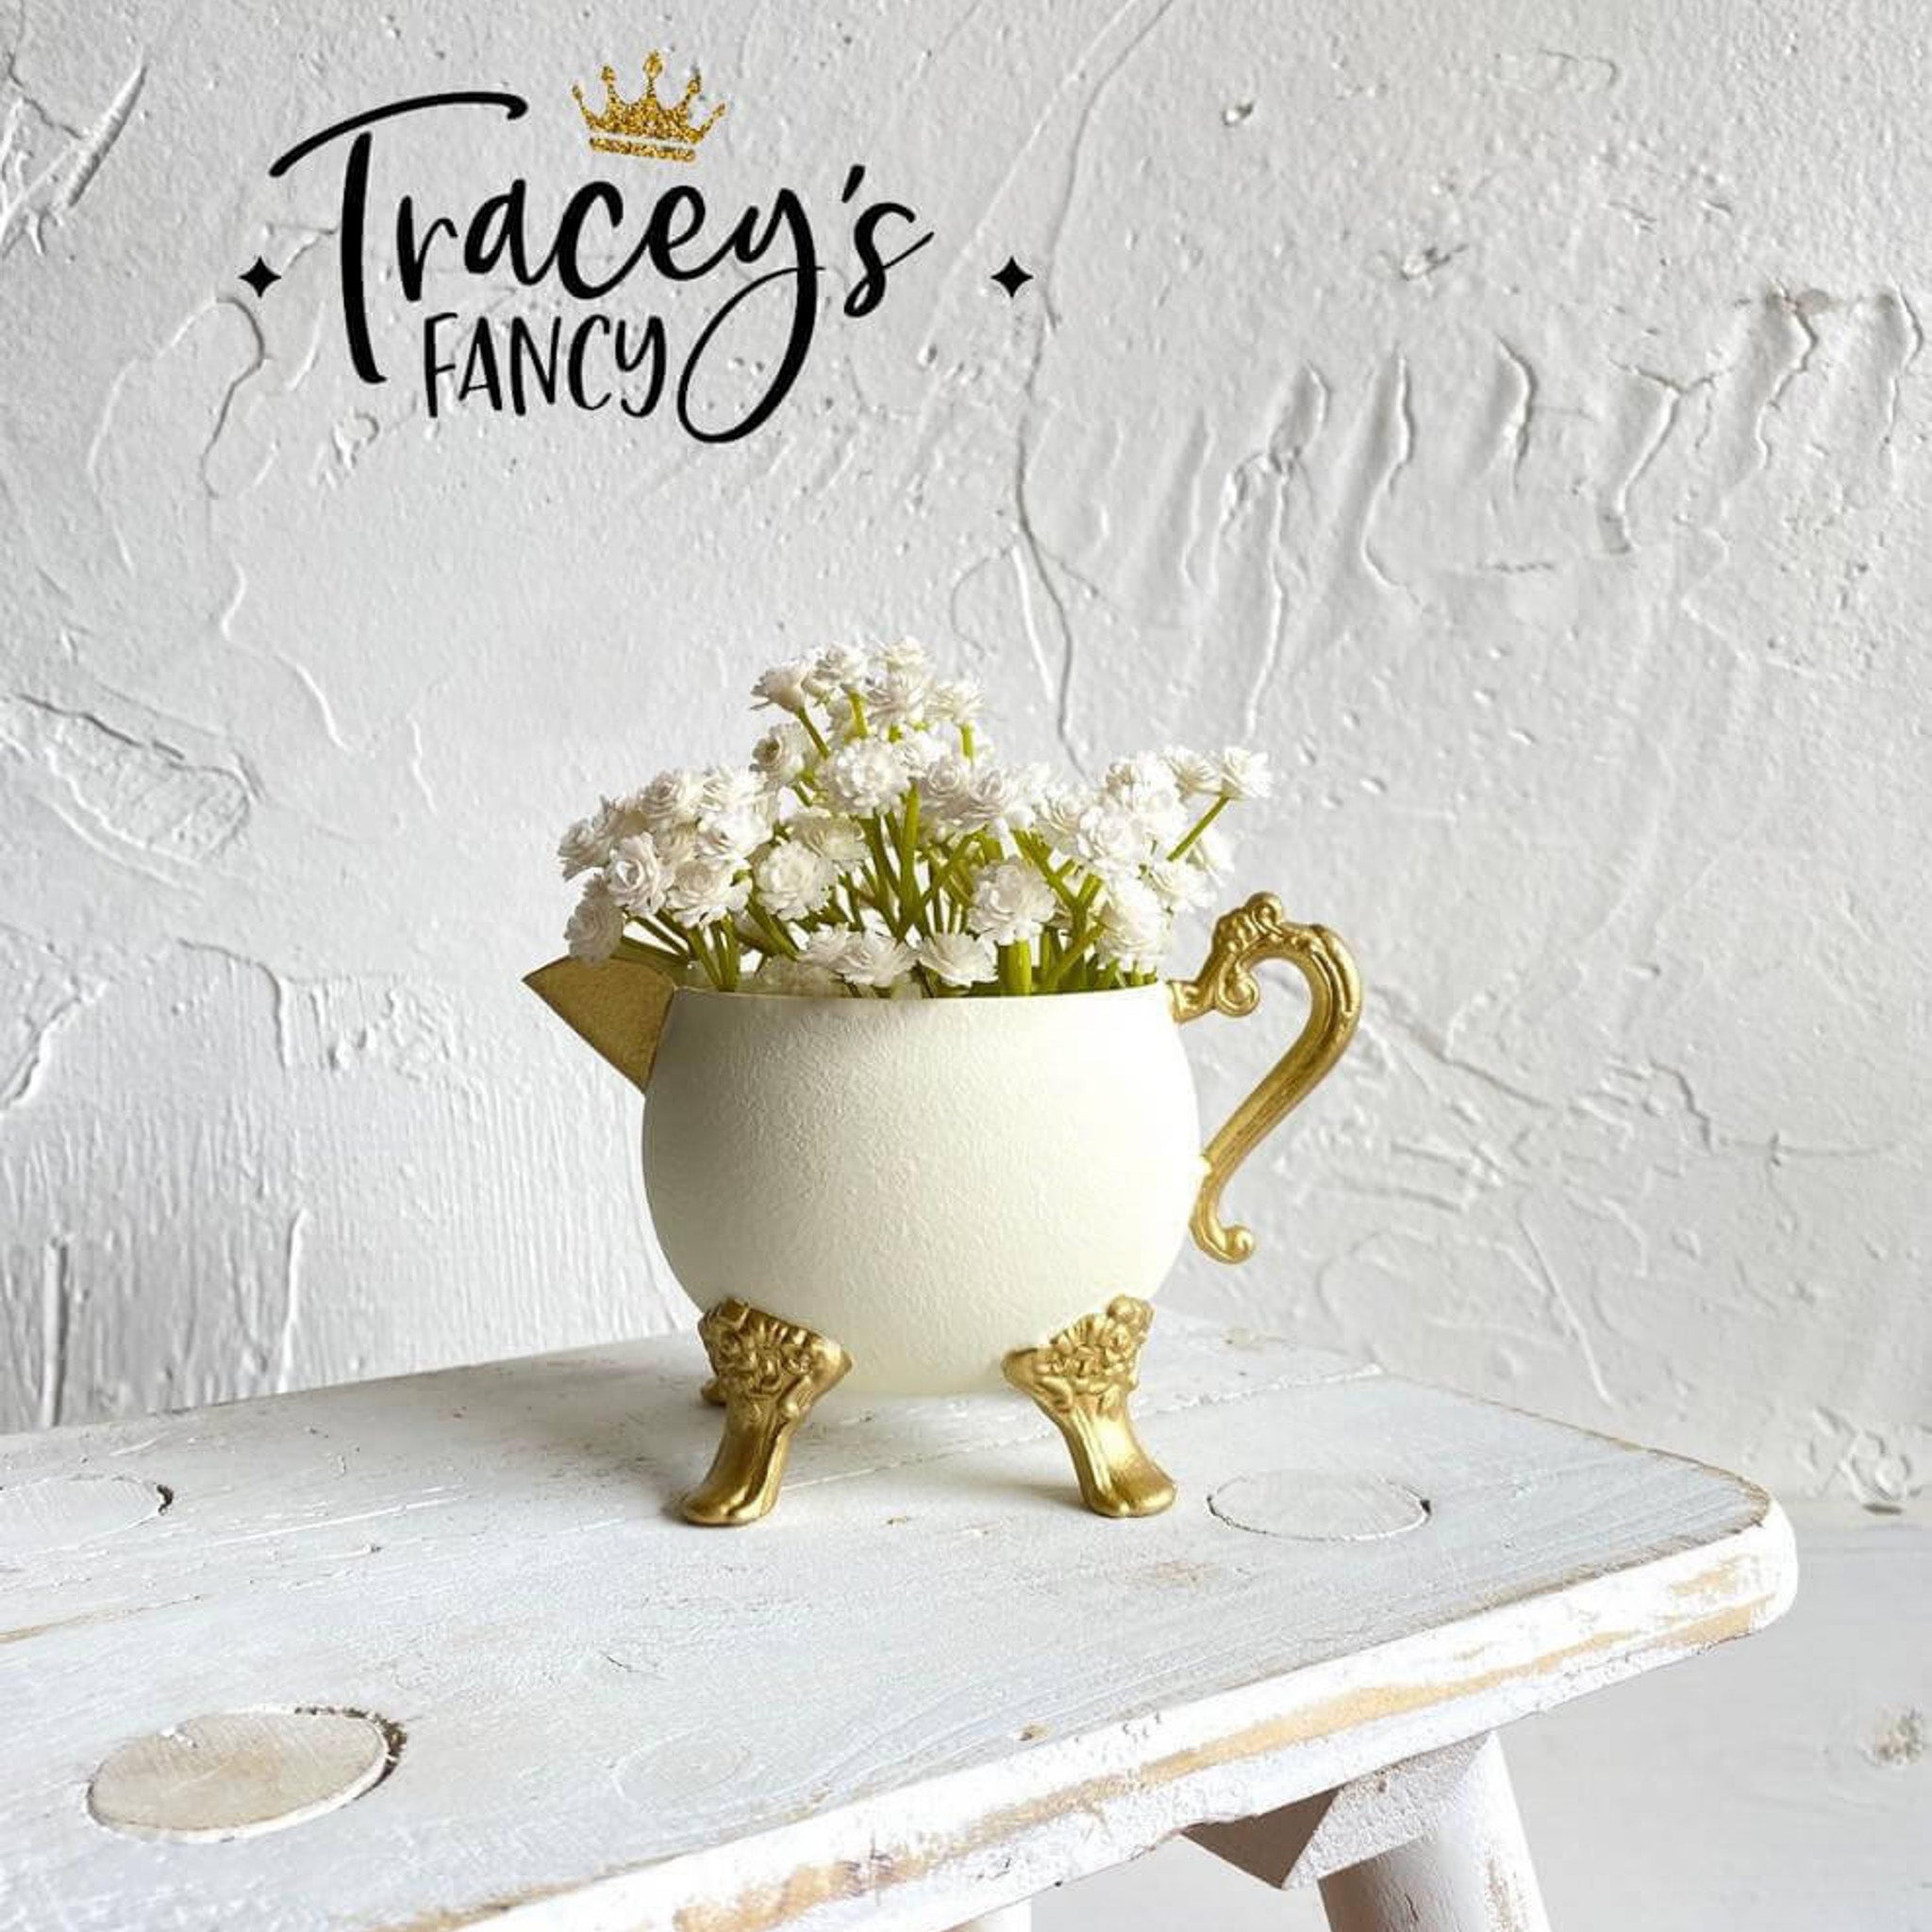 A small ceramic vase turned into a watering vessel created by Tracey's Fancy is painted in Dixie Belle's Cucumber Ice chalk mineral paint and has gold painted legs, handle and spout.